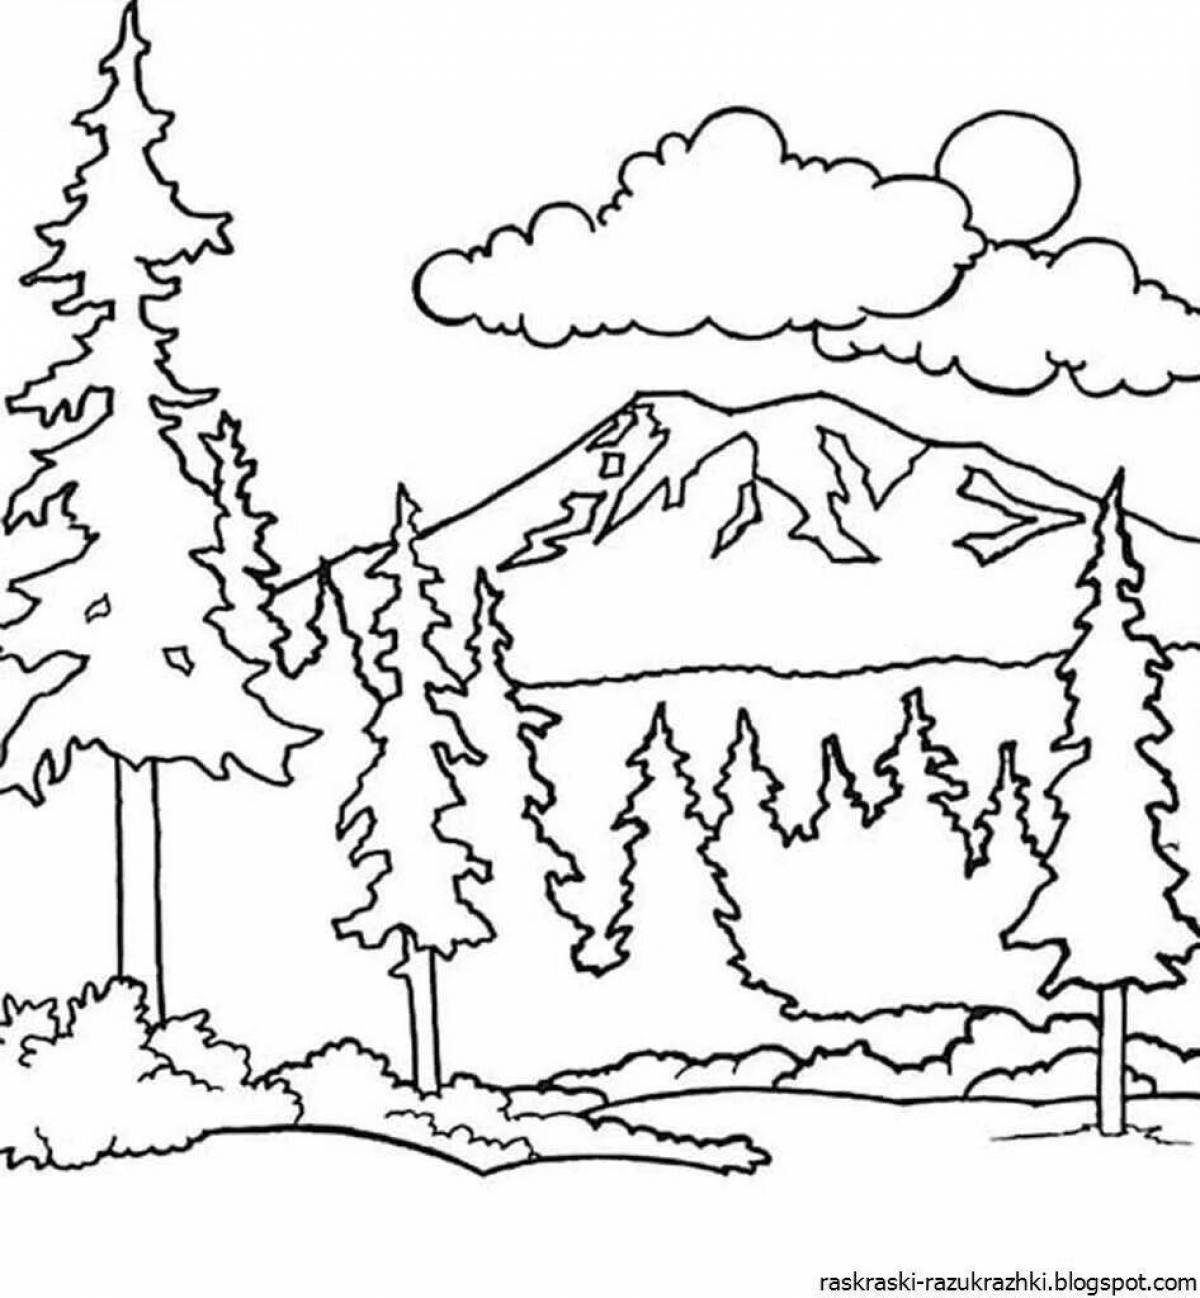 Colouring serene spruce forest